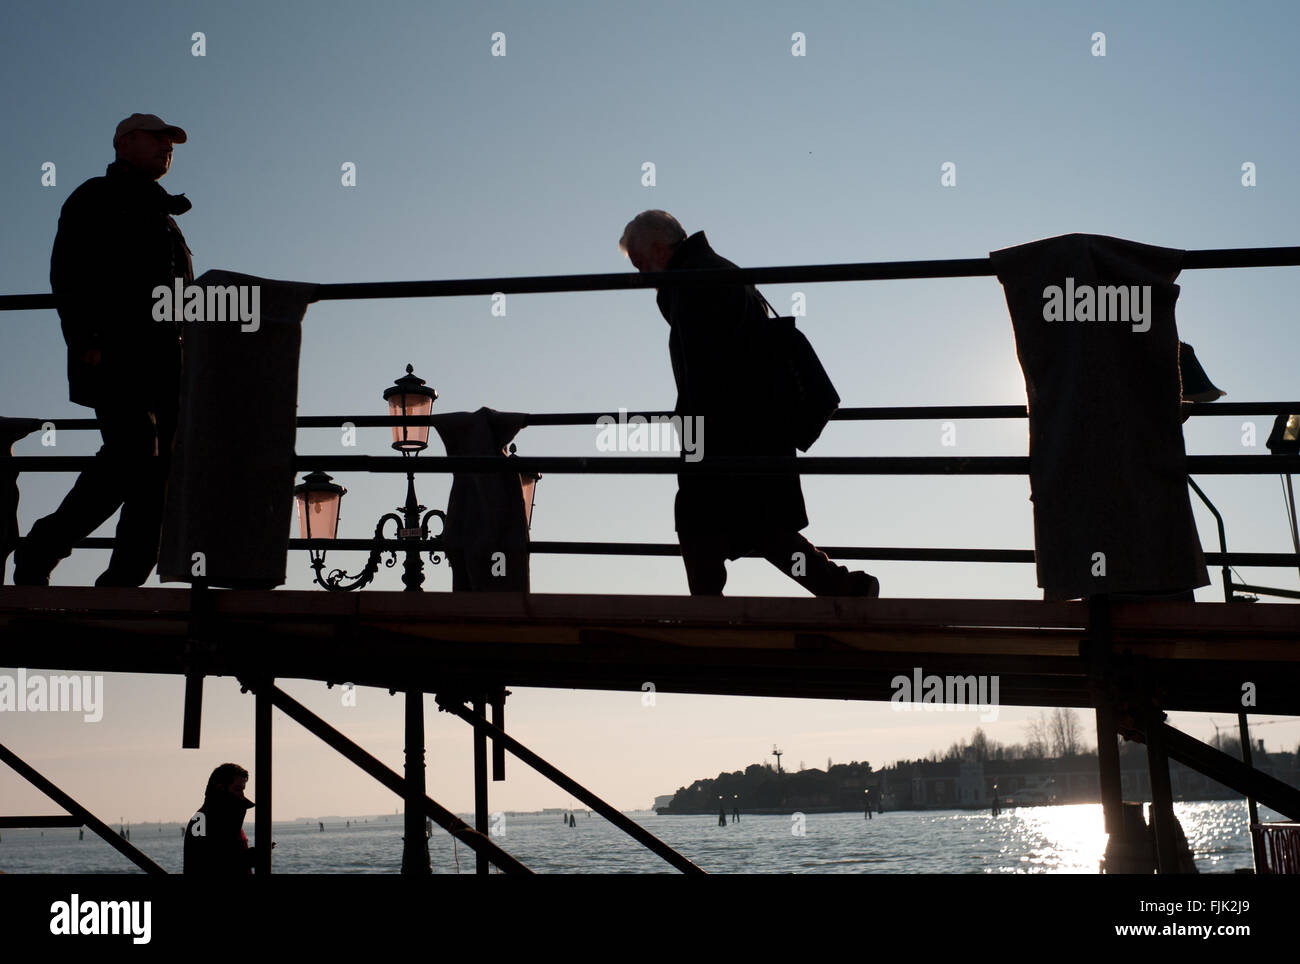 Silhouette people crossing a bridge at sunset. Venice, Italy Stock Photo